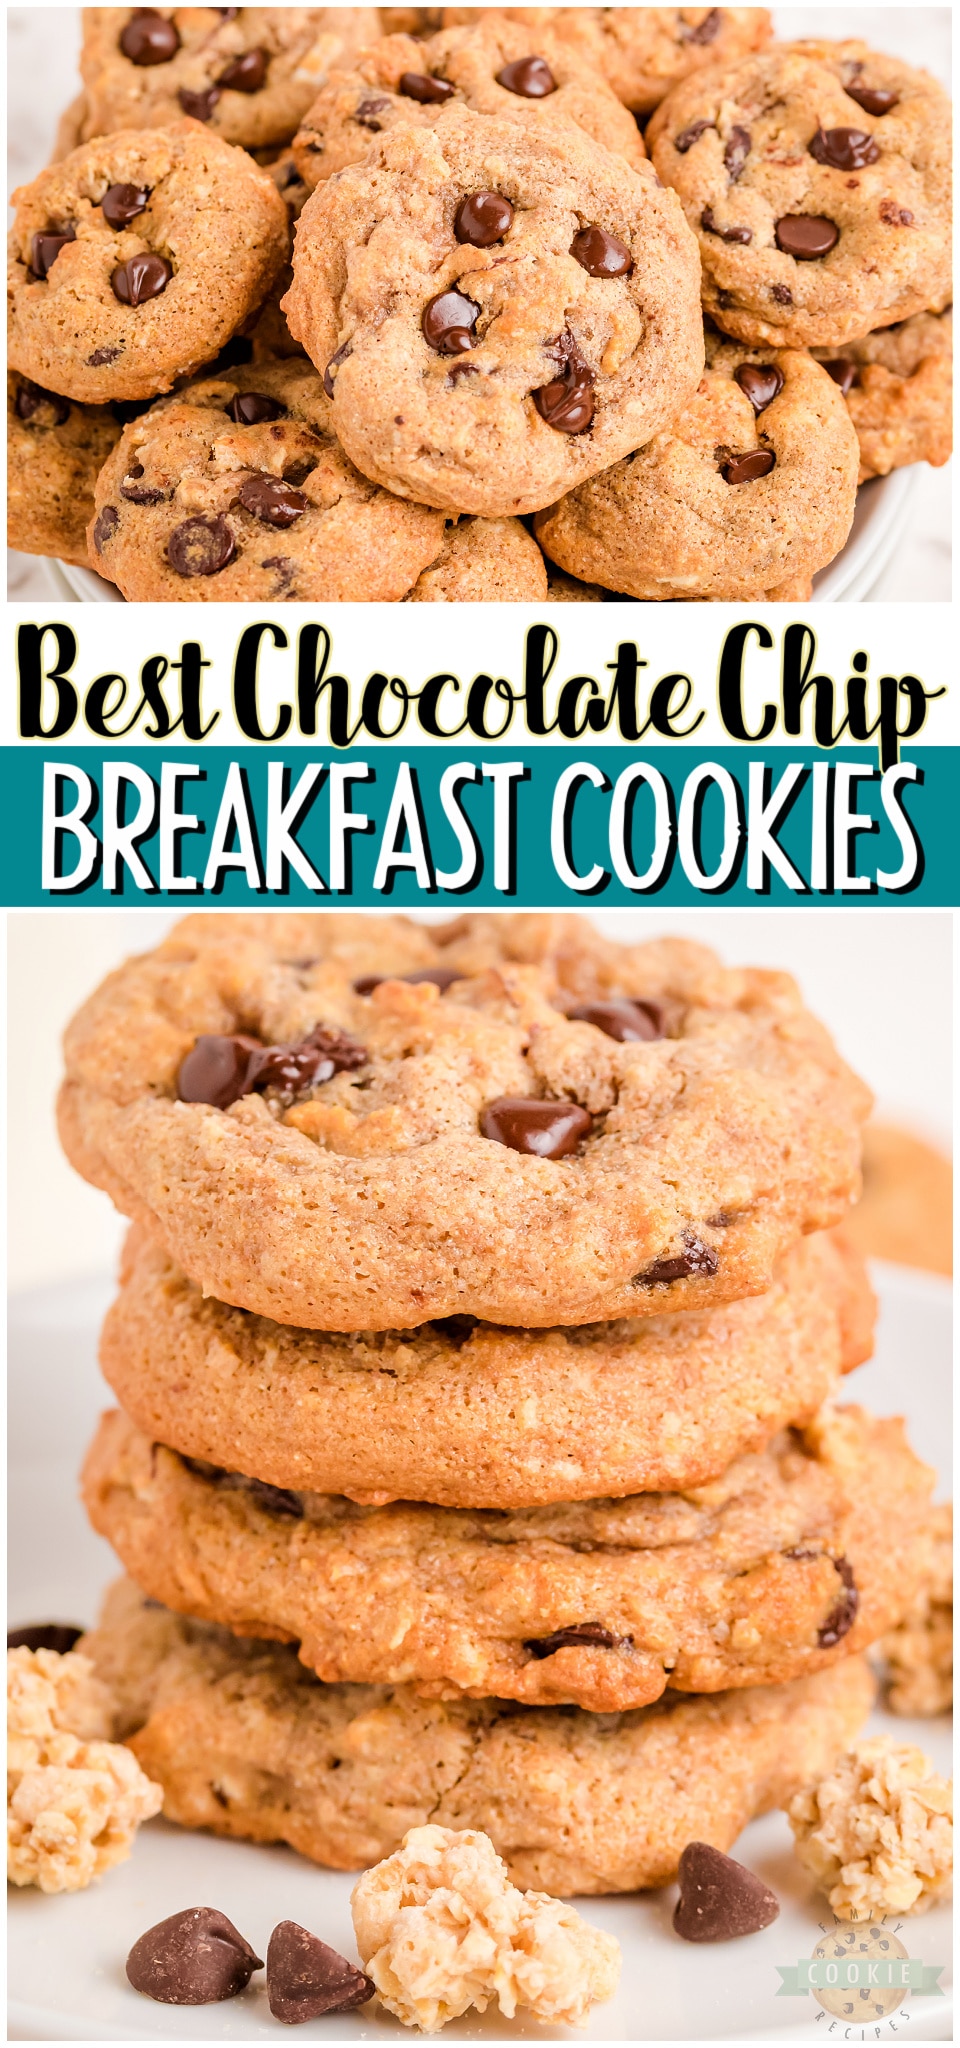 Breakfast chocolate chip cookies are a perfect snack that you can feel good about. Whole wheat flour, applesauce, granola, & dark chocolate combine to make tasty low-calorie & low sugar cookies! #breakfast #cookies #chocolatechip #baking #lowsugar #lowcal #easyrecipe from FAMILY COOKIE RECIPES via @buttergirls